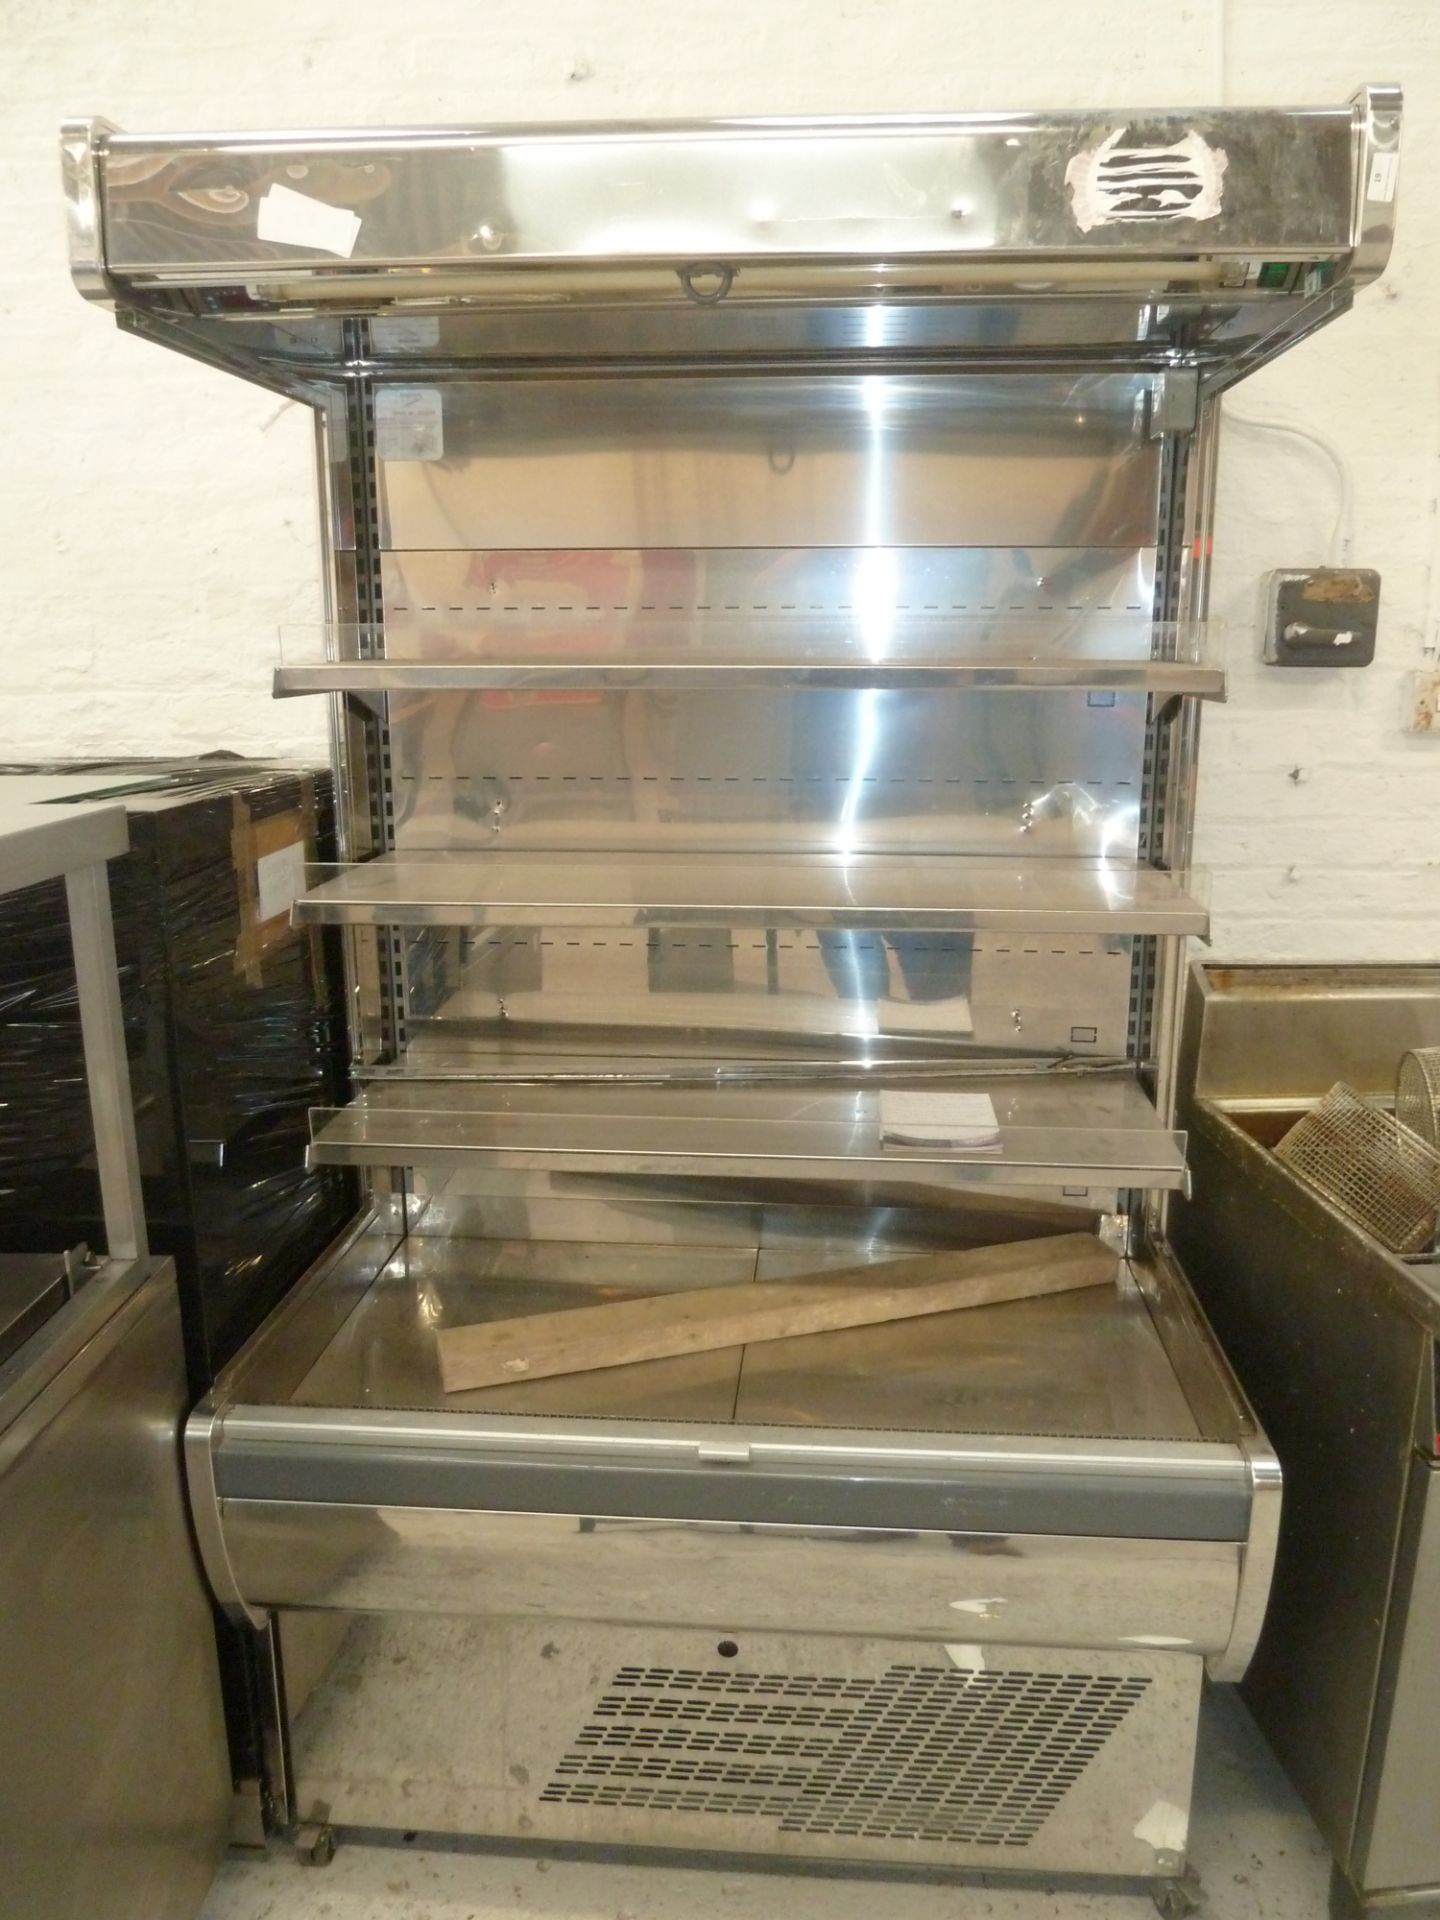 * Synecore display chiller 4 tier grab and go, very good condition.(1200Wx2000Hx810D)